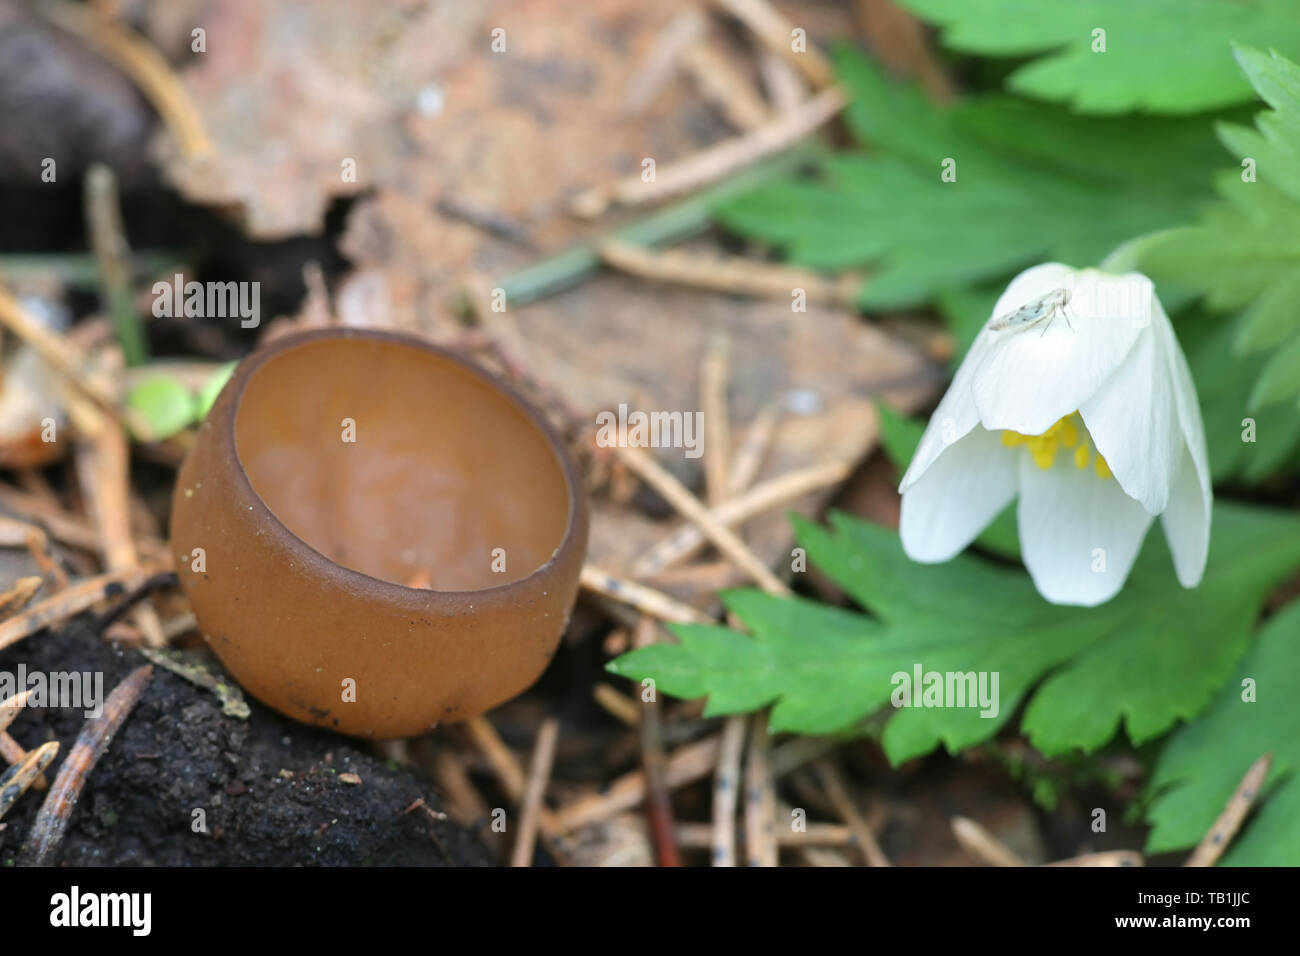 Dumontinia tuberosa, known as the anemone cup, wild fungus from Finland Stock Photo